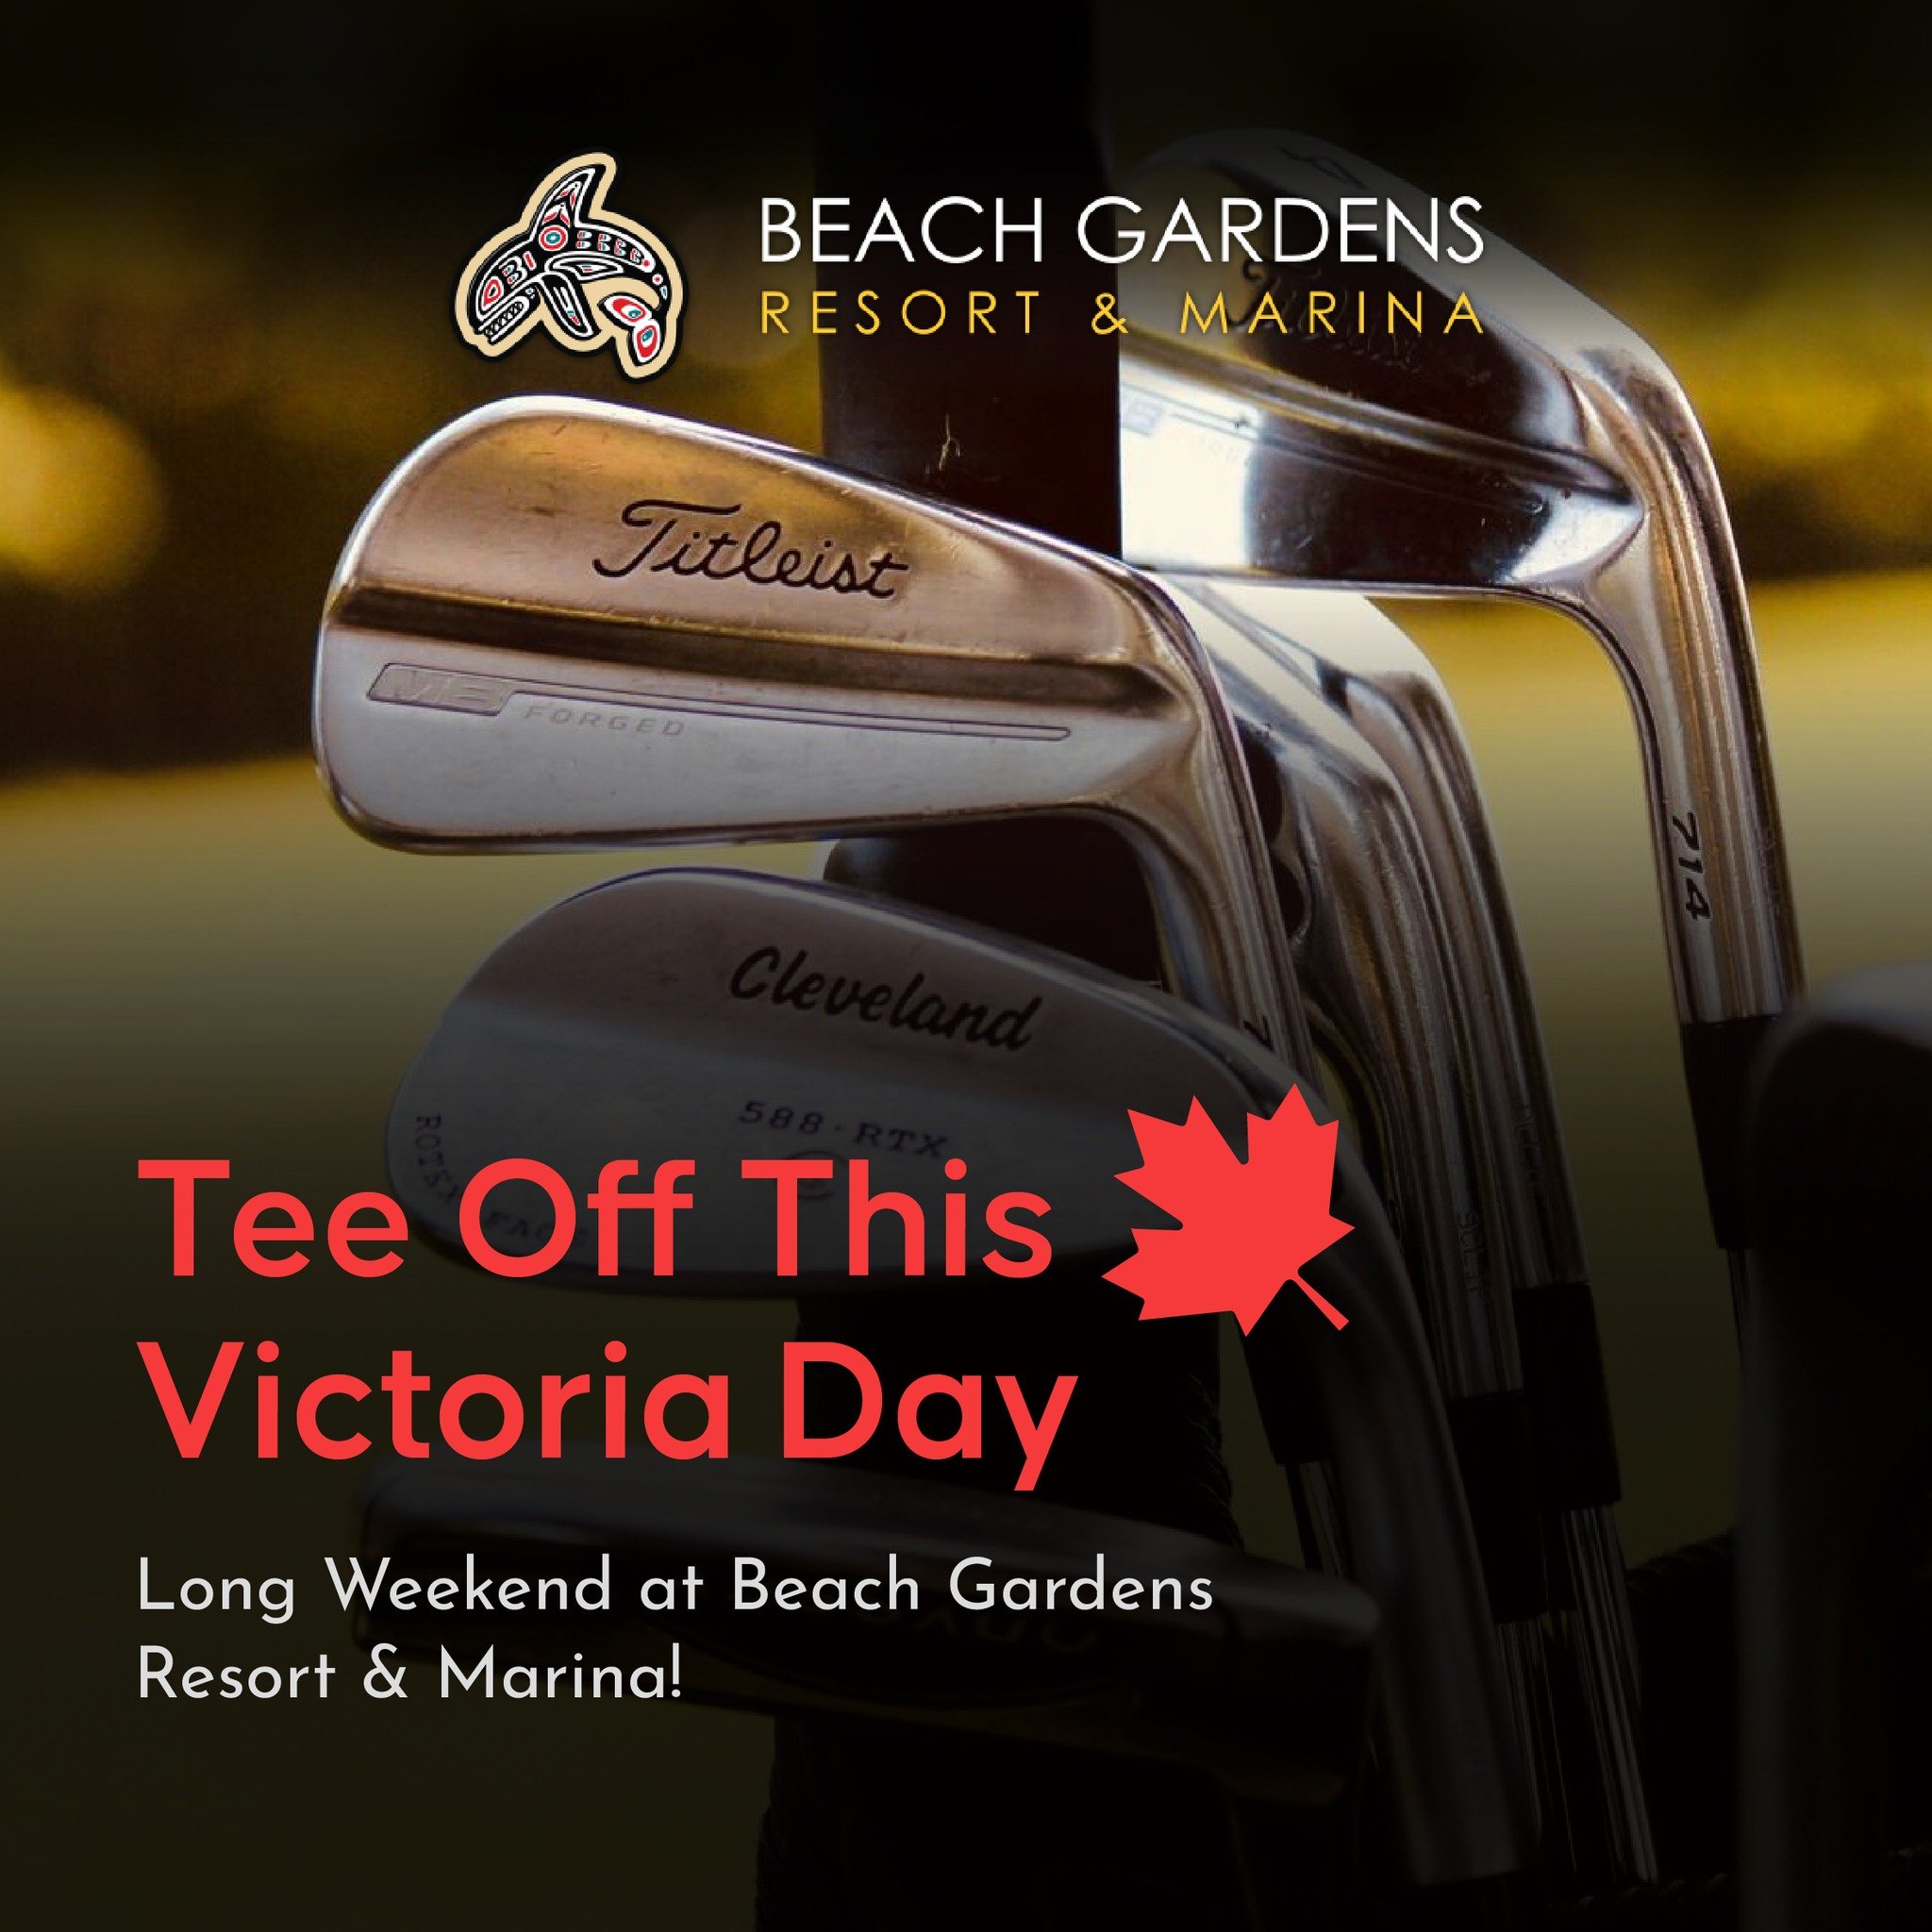 🌟 Tee Off This Victoria Day Long Weekend at Beach Gardens Resort &amp; Marina! ⛳

Embark on an unforgettable golf retreat along the stunning Sunshine Coast with our exclusive Myrtle Point Challenge Package.

Package Highlights:
🌊 2 nights in deluxe